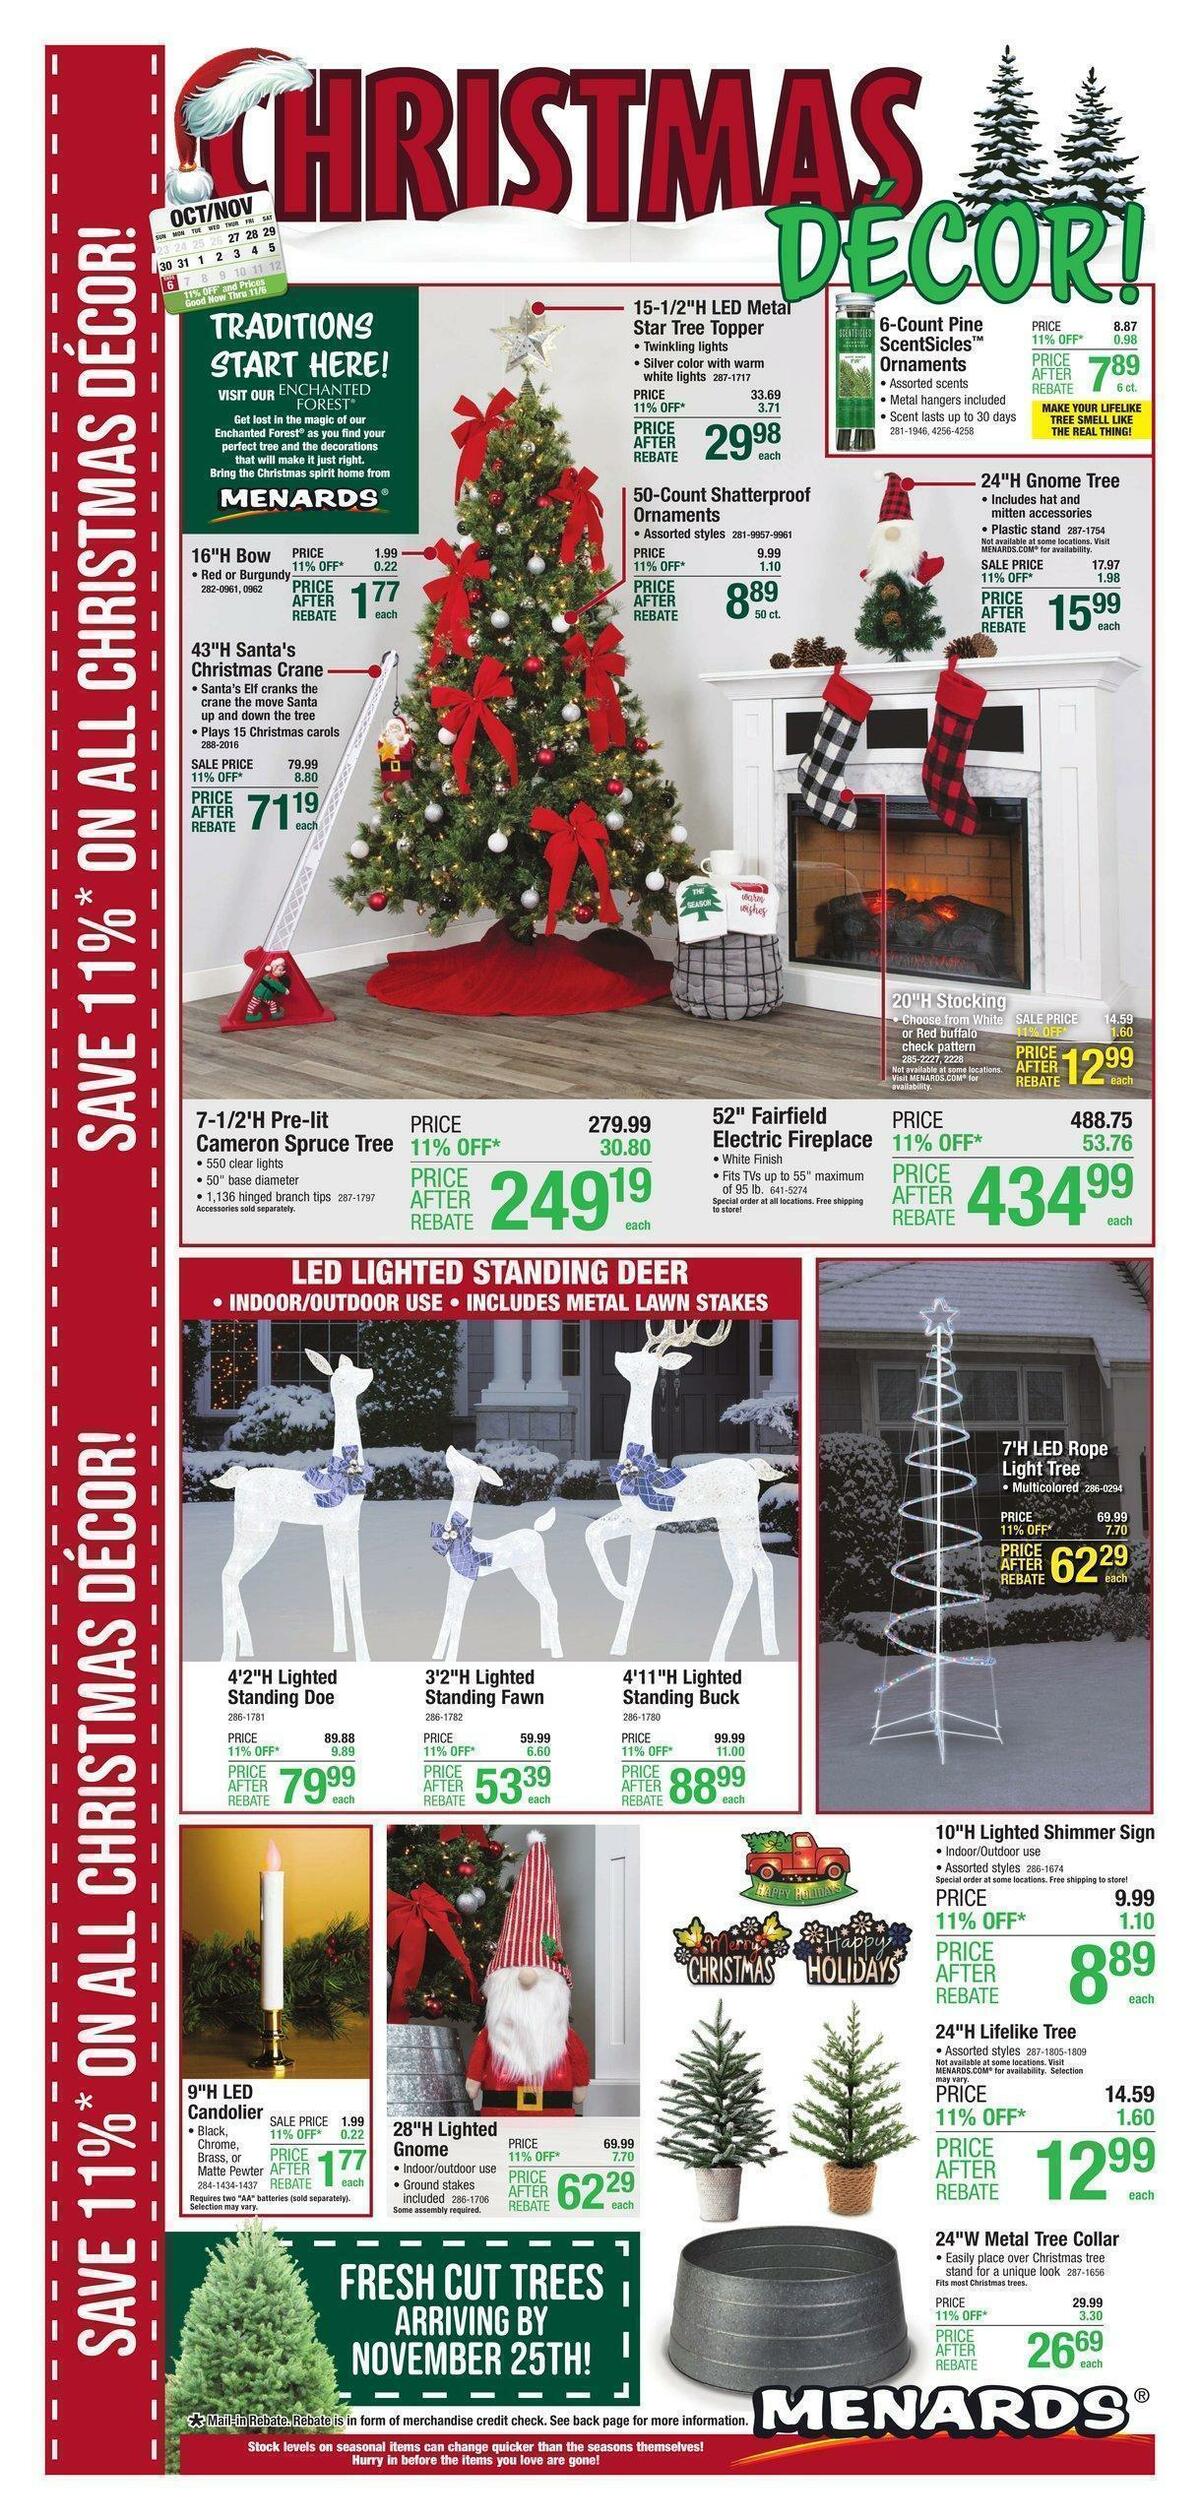 Menards Christmas Decor Weekly Ad from October 26